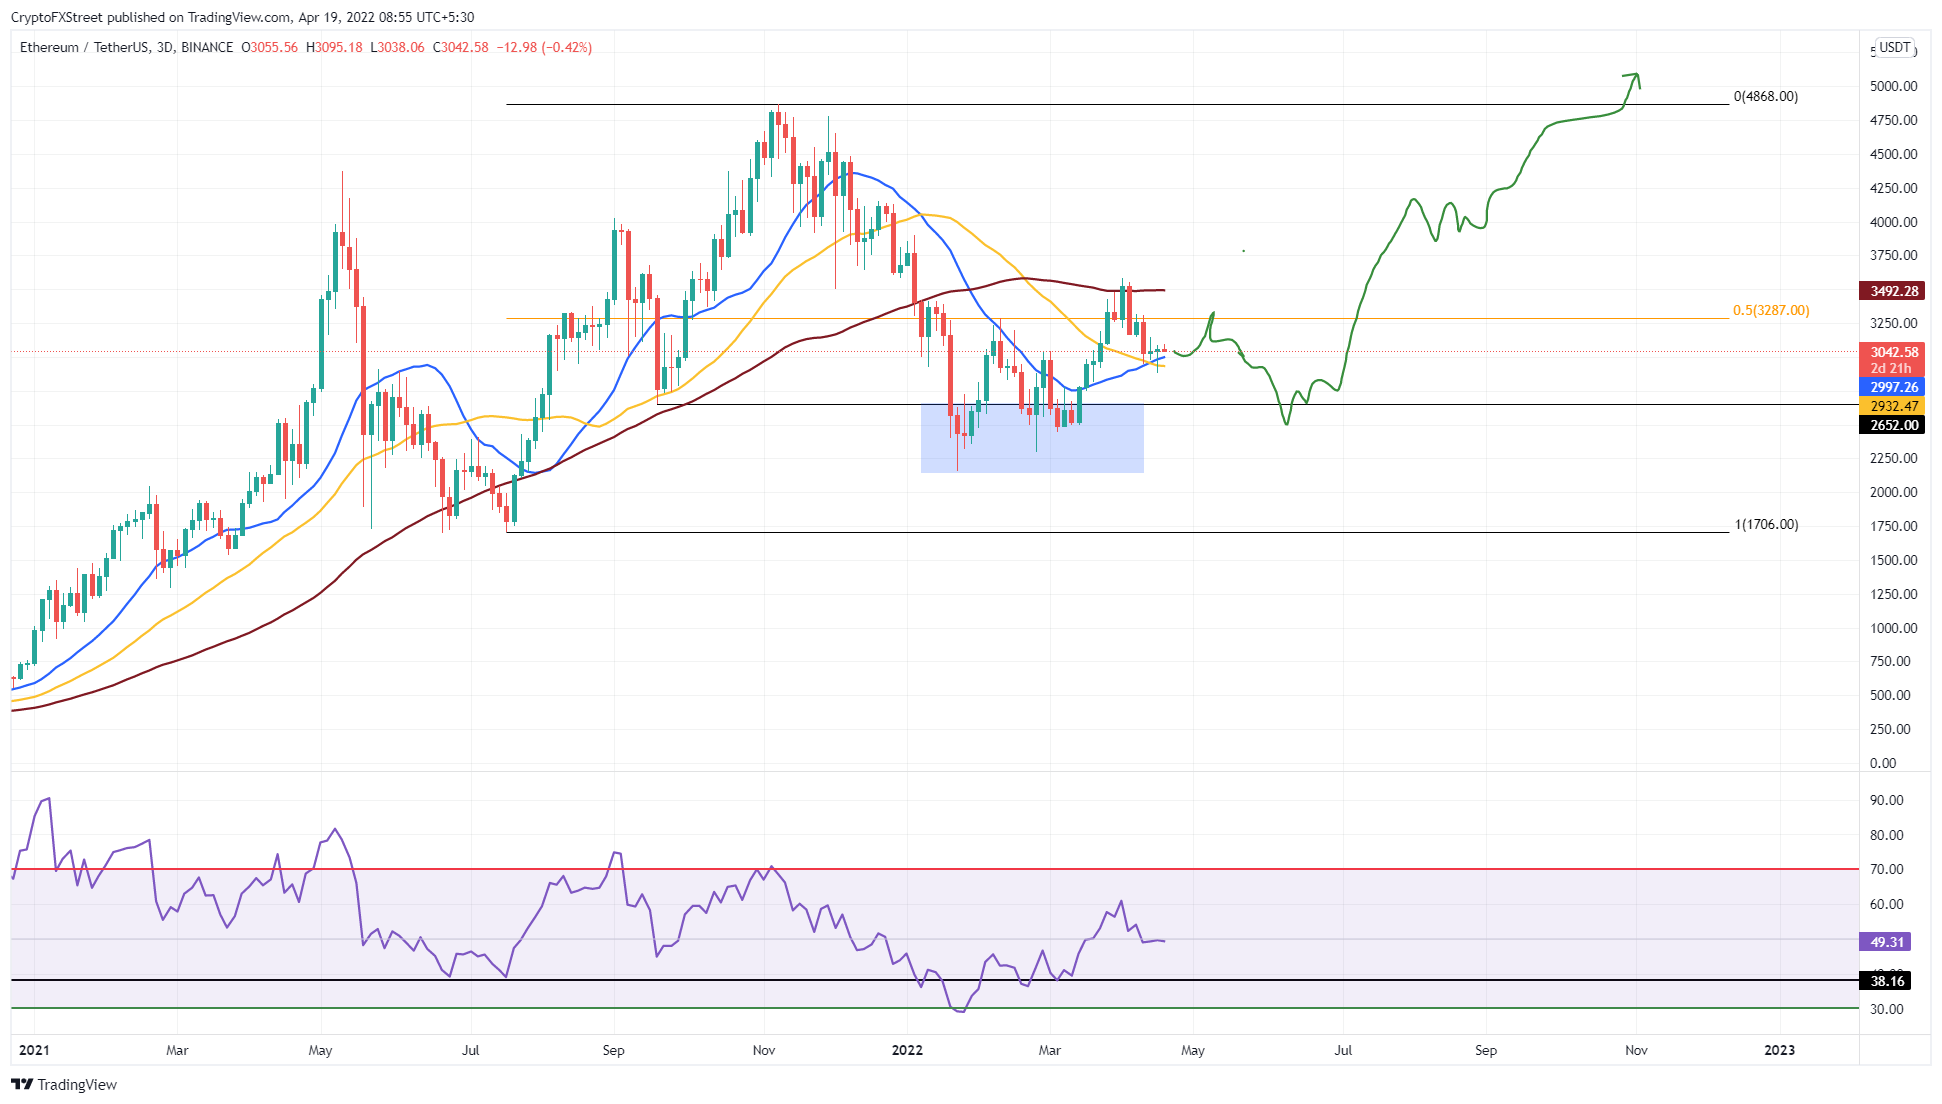 Five bullish signals that suggest Ethereum price could hit $5,000 - 1